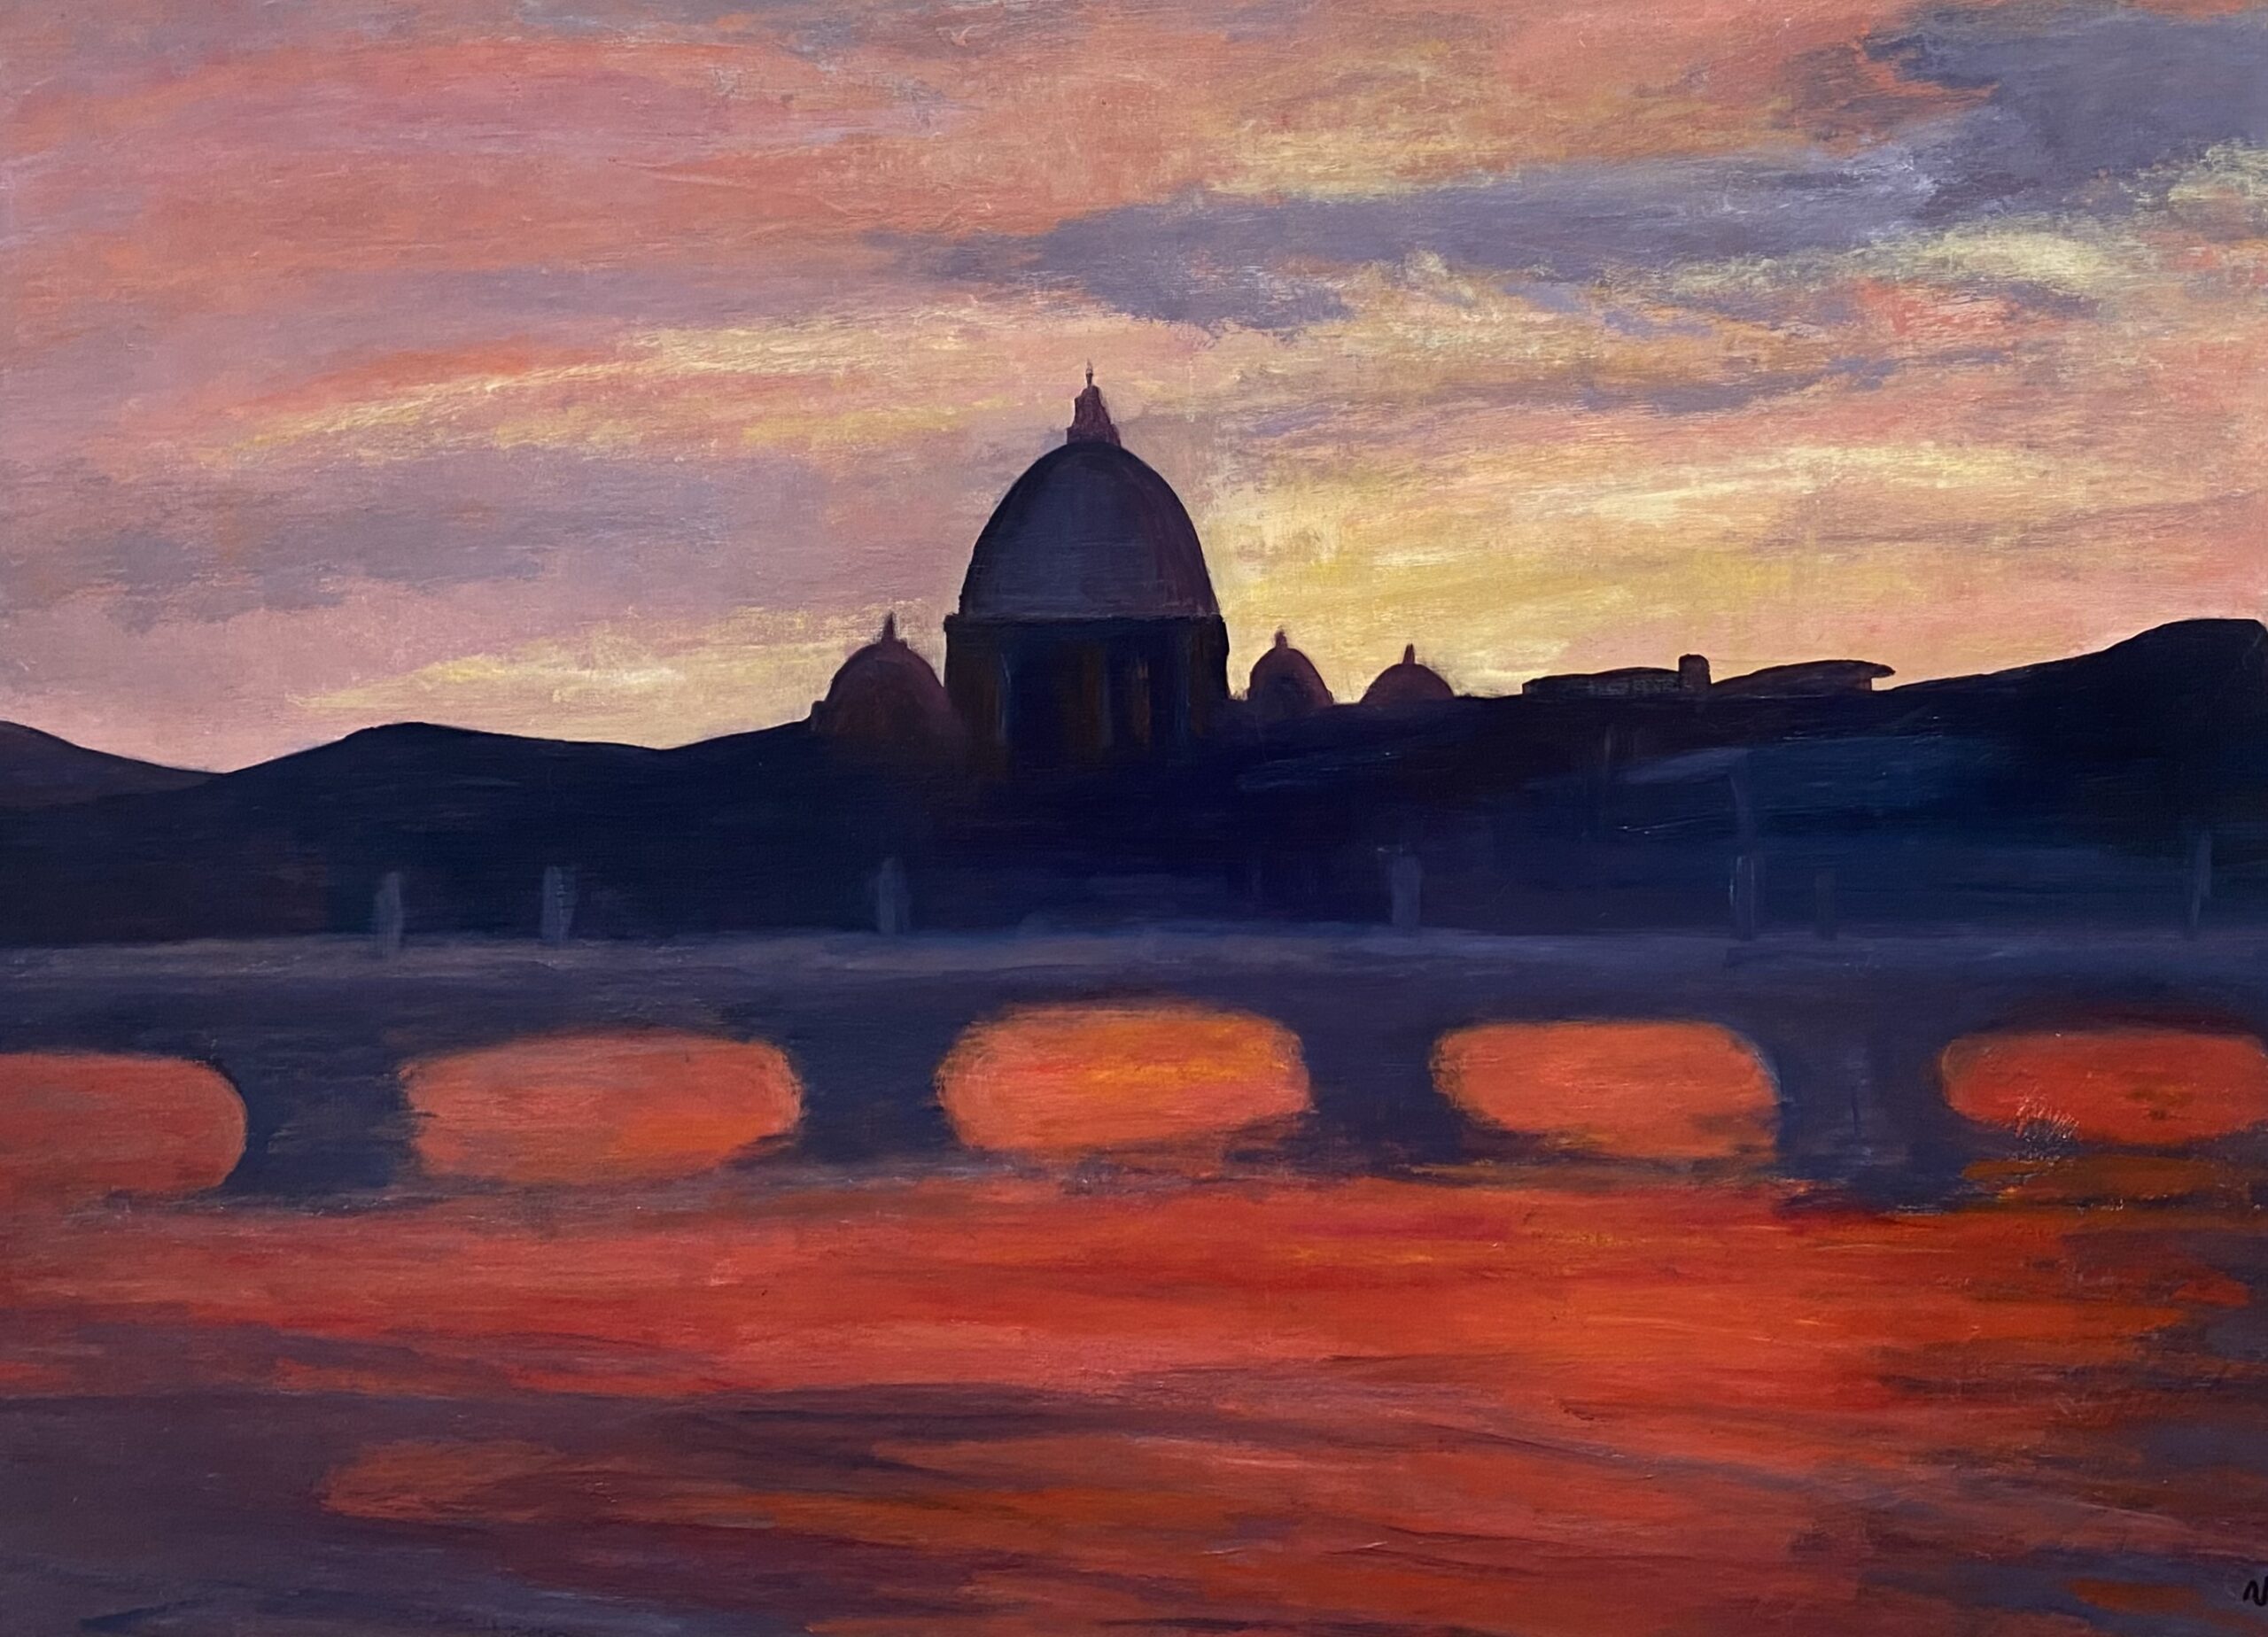 St. Peter’s at Sunset, Rome 23" x 33”